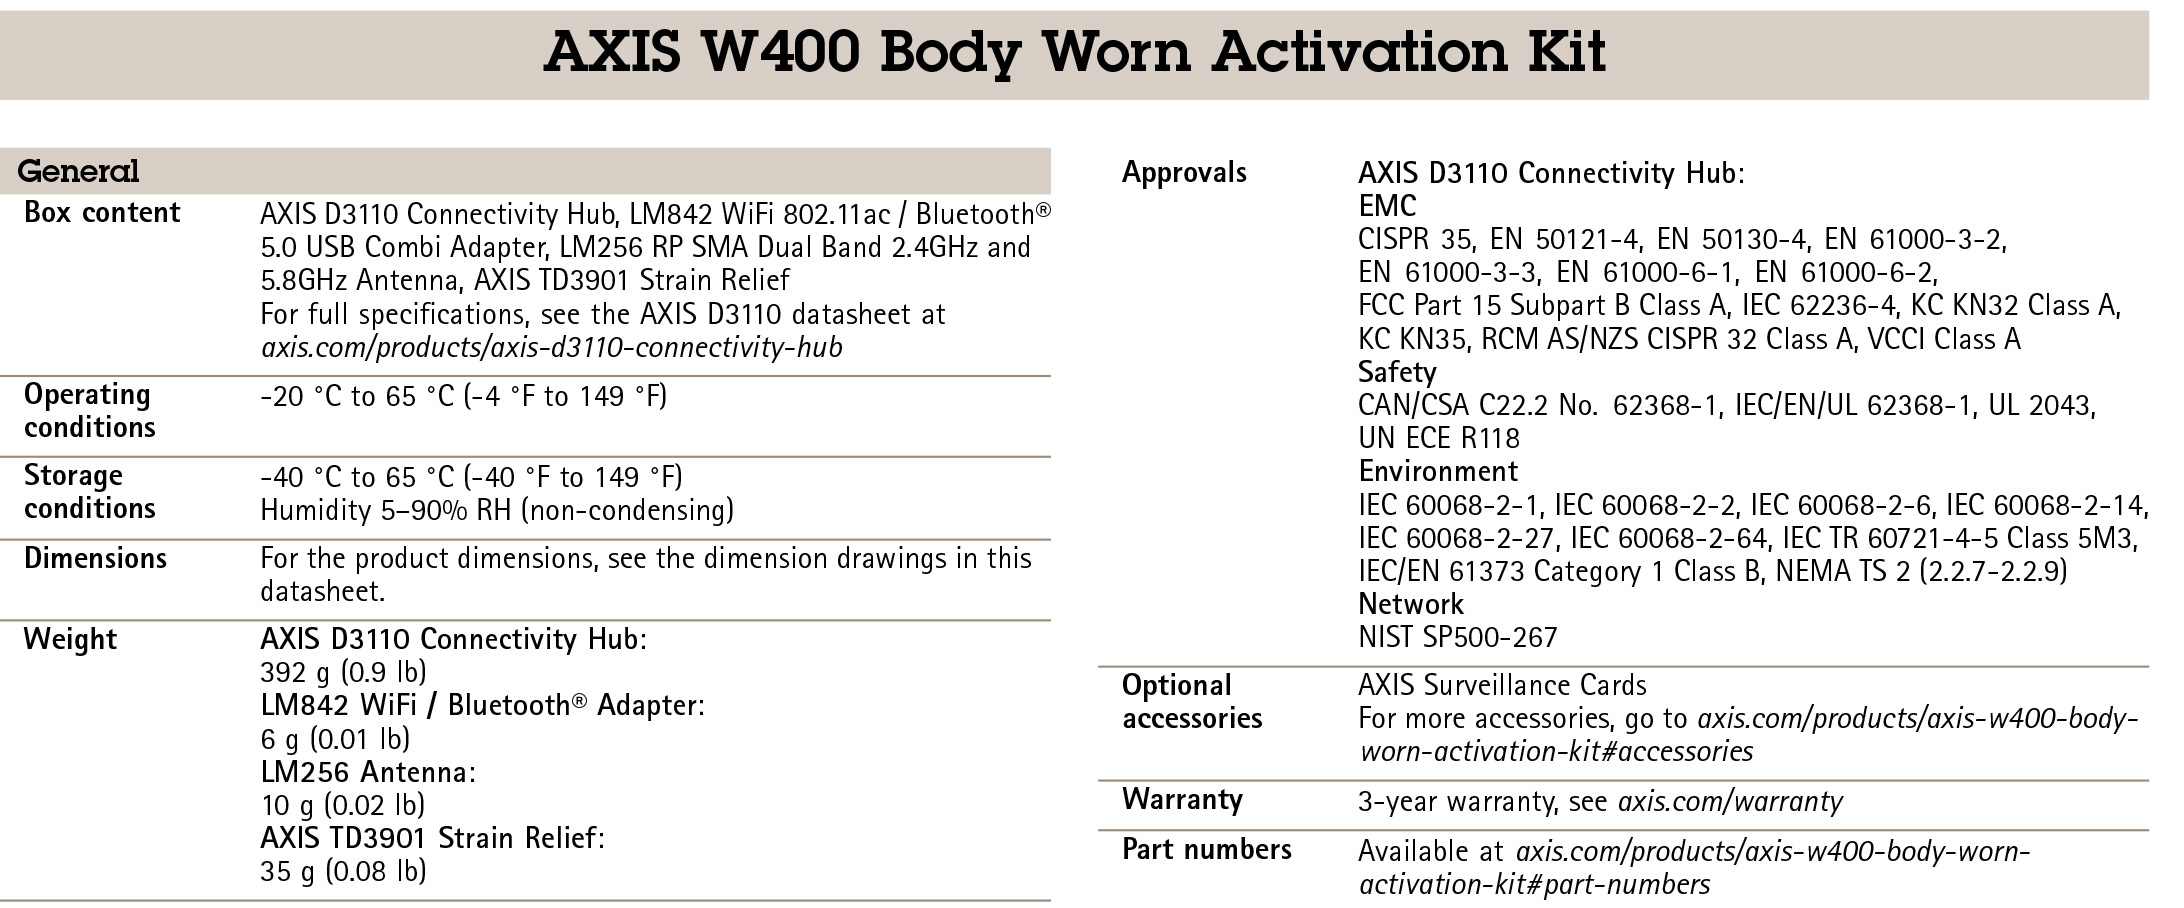 AXIS W400 Body Worn Activation Kit